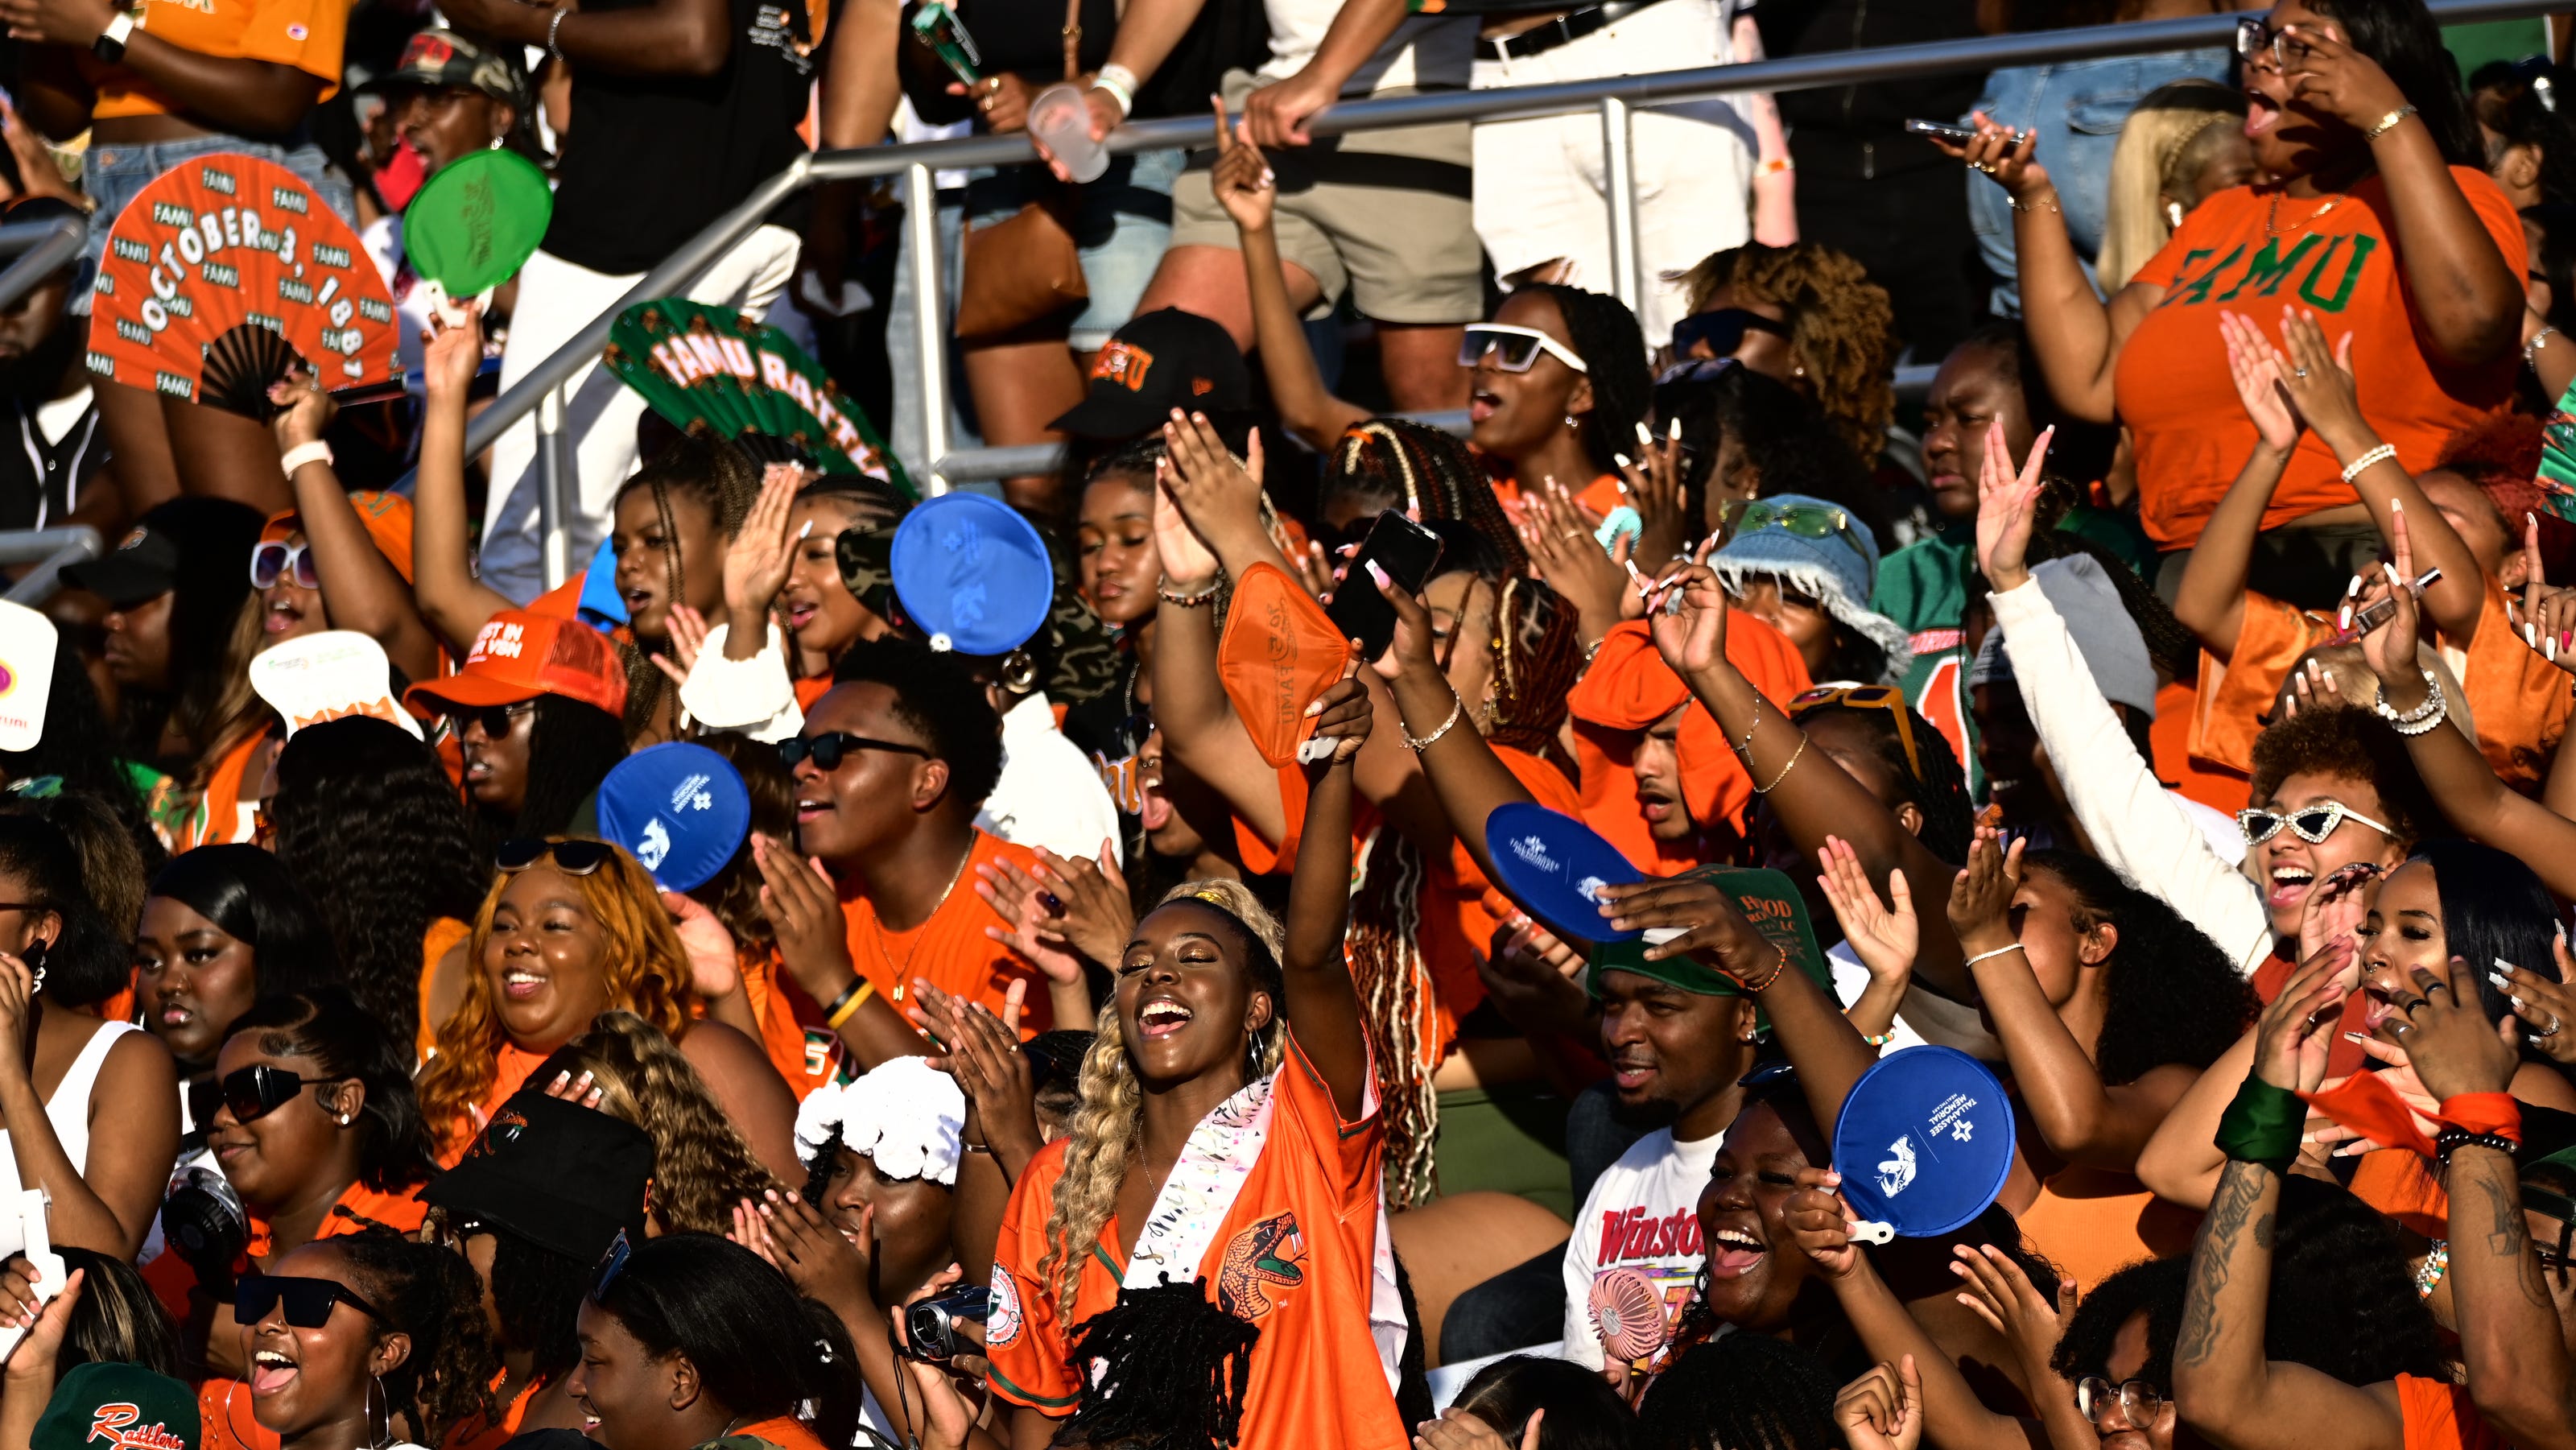  Thanks to FSU and FAMU, Tallahassee ranks in top 10 for college football fans in study 